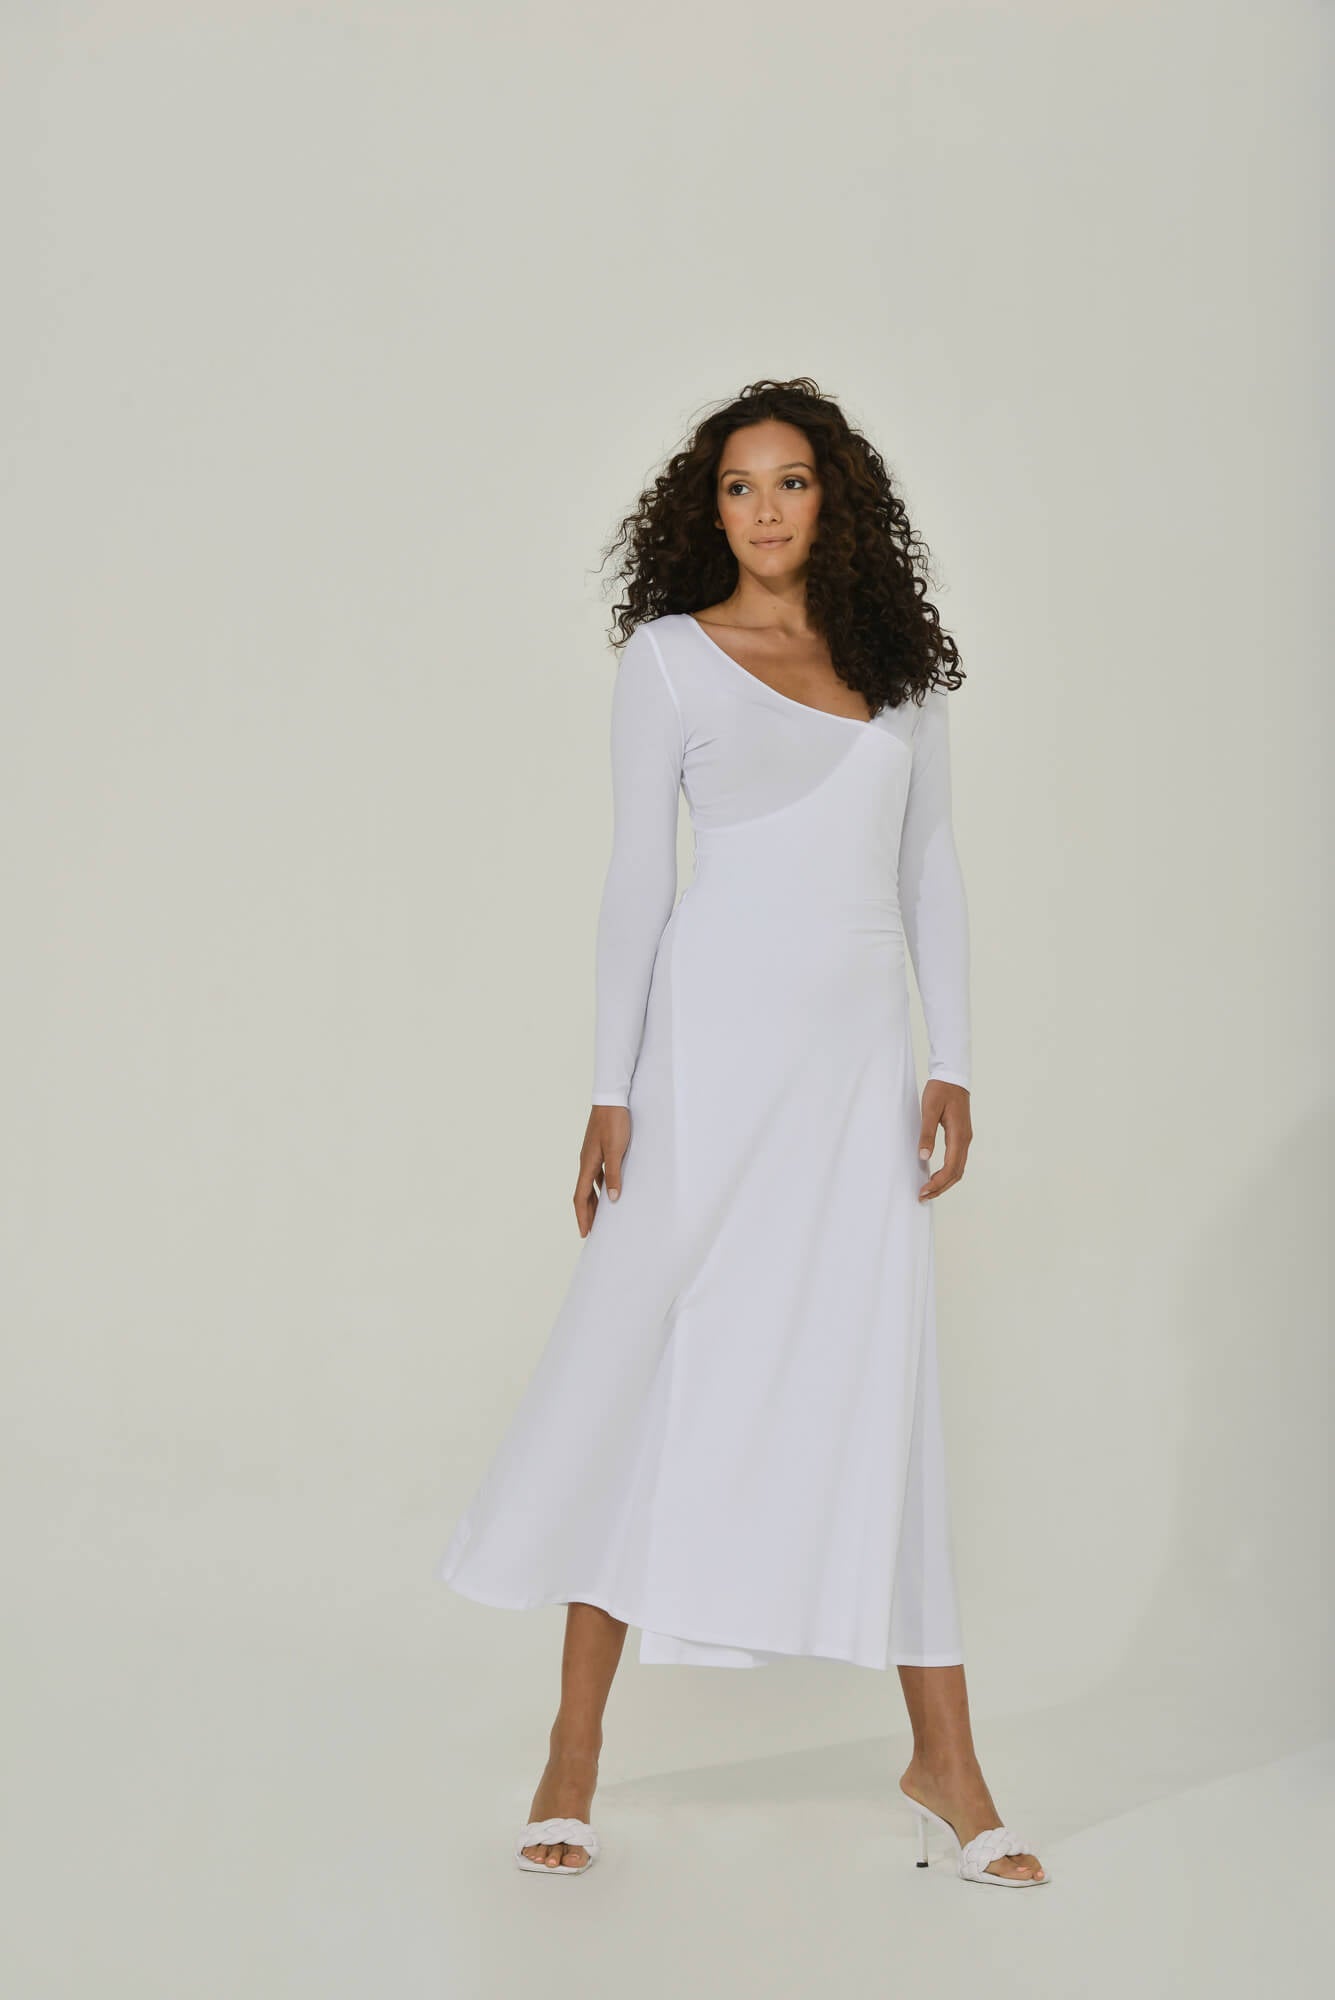 Amazon.com: The Drop Women's Snow White Long Sleeve Maxi Dress by  @carolinecrawfordpatterson, M : Clothing, Shoes & Jewelry